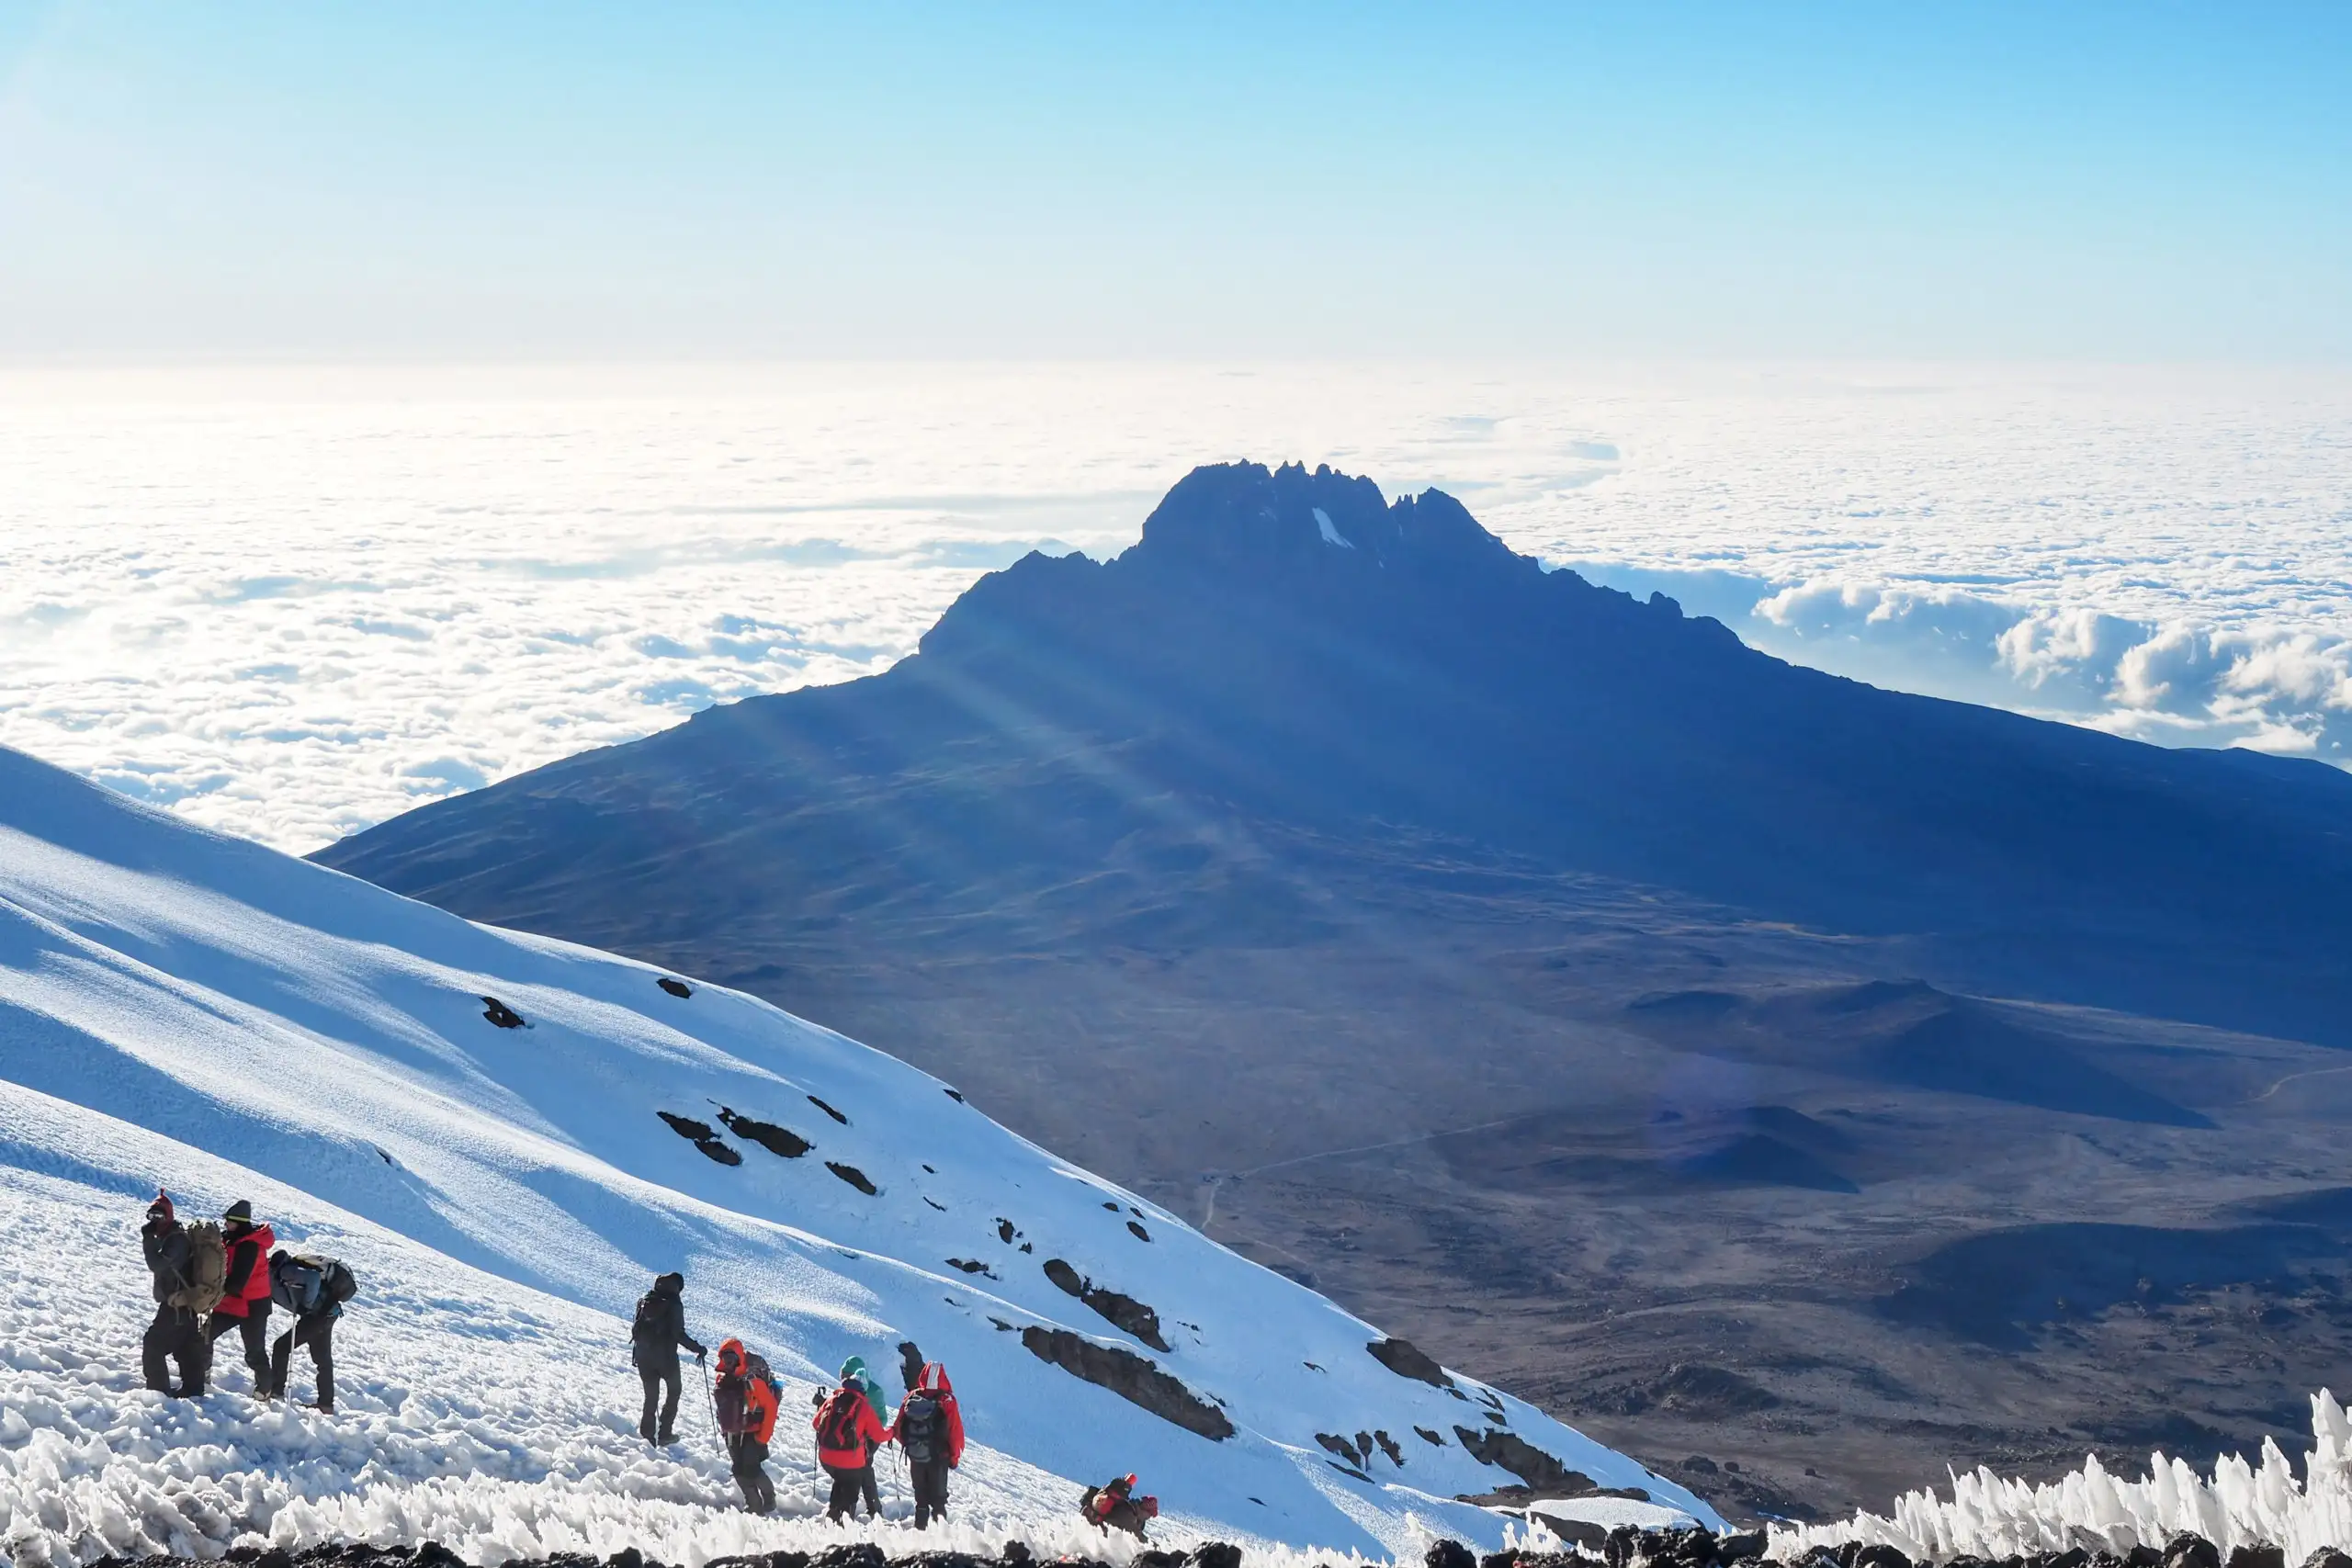 Group of people hiking through Mount Kilimanjaro in the snow